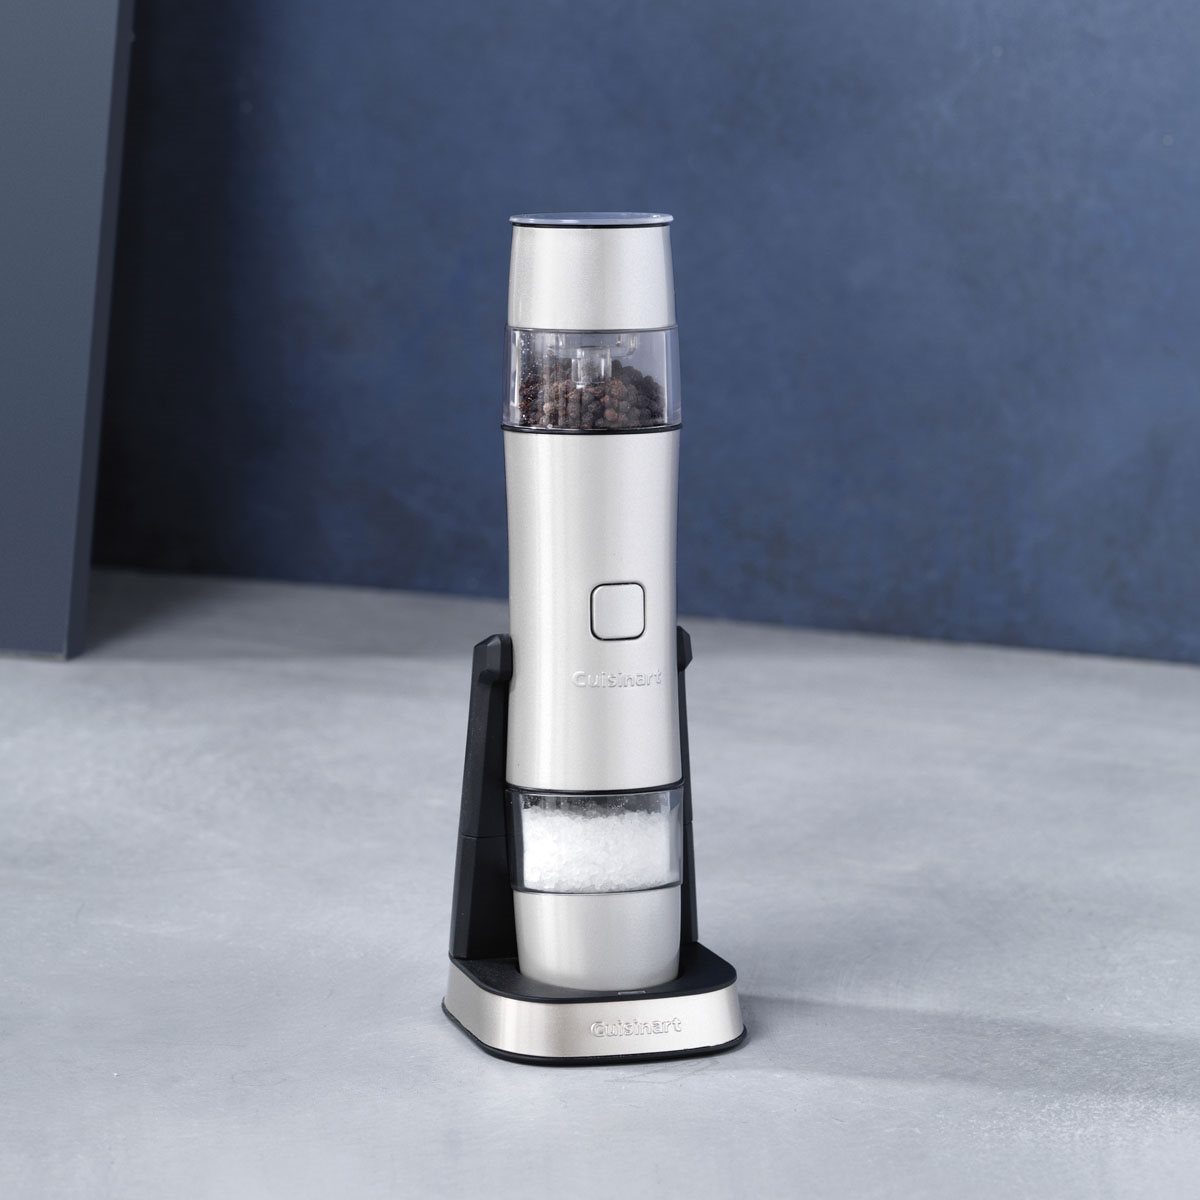 CUISINART SALT PEPPER & SPICE MILL RECHARGEABLE BRAND NEW / NEVER REMOVED 